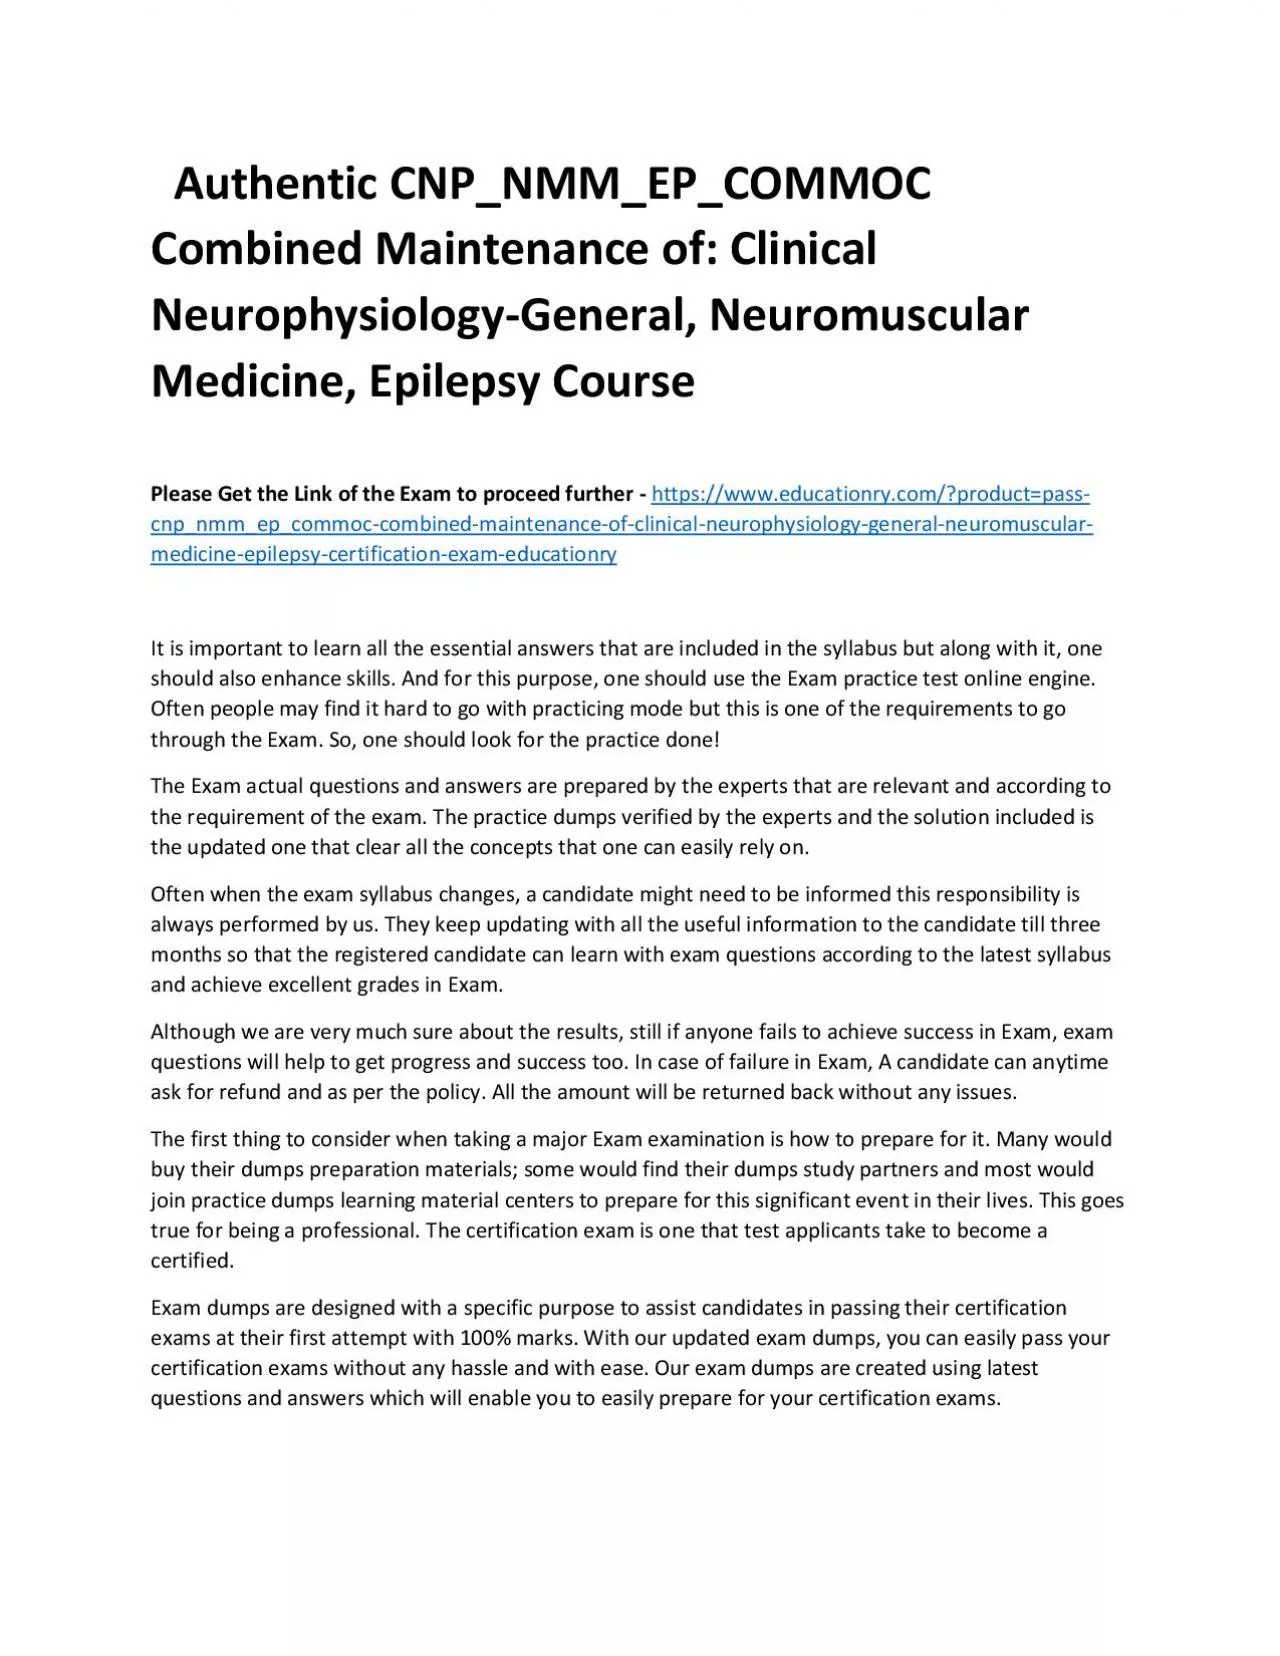 Authentic CNP_NMM_EP_COMMOC Combined Maintenance of: Clinical Neurophysiology-General,